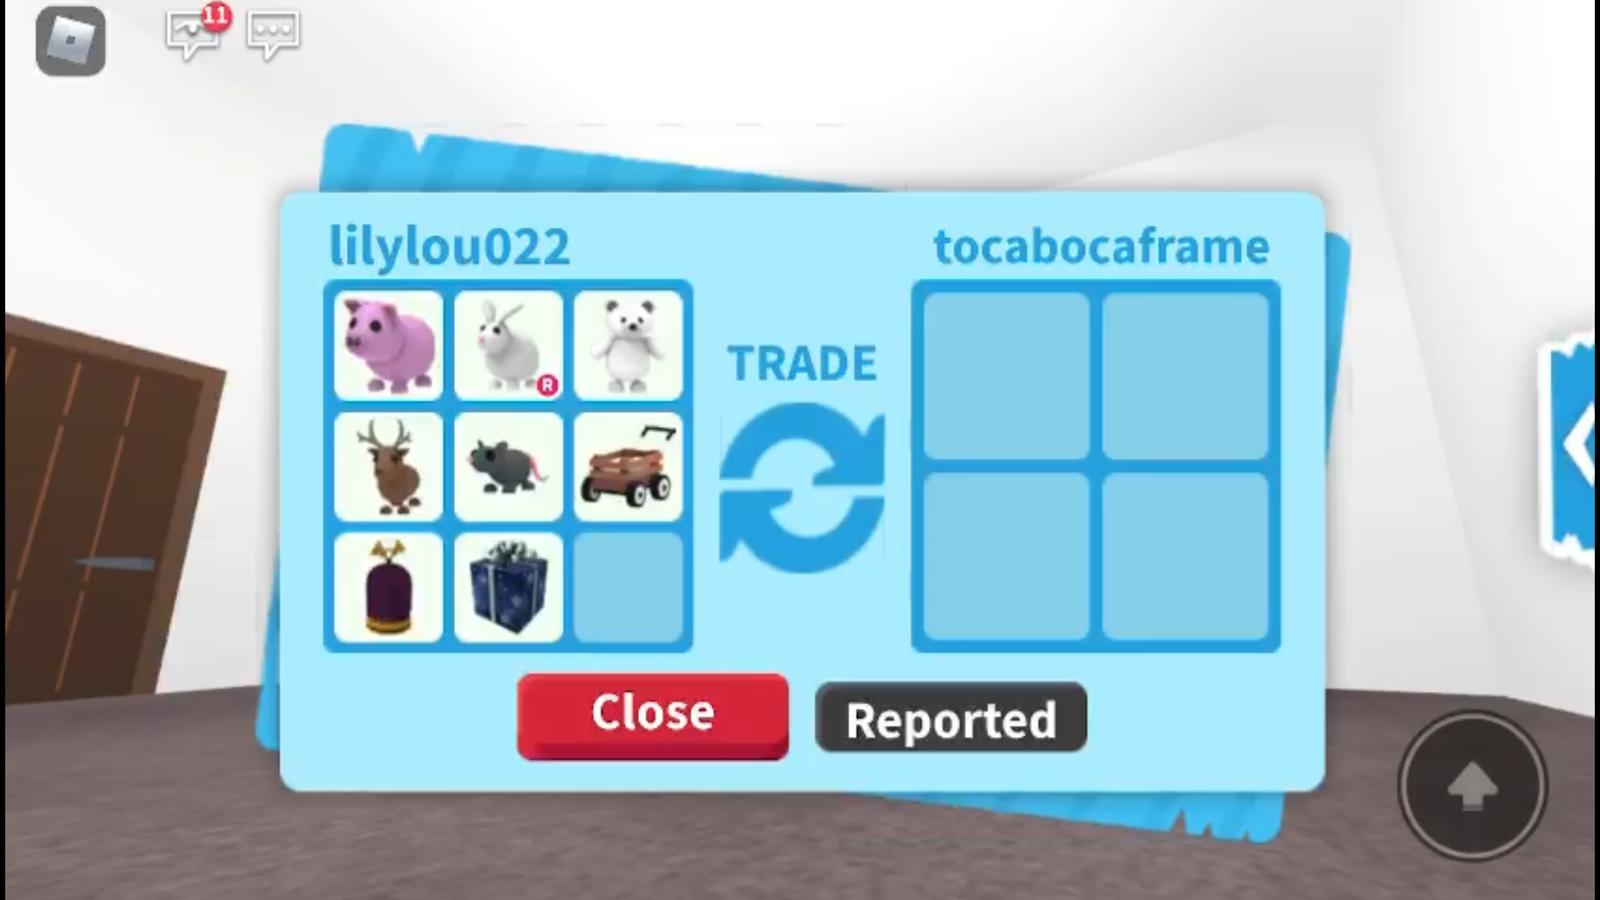 Roblox complaint Account hacked and all legendaryrare pets stolen